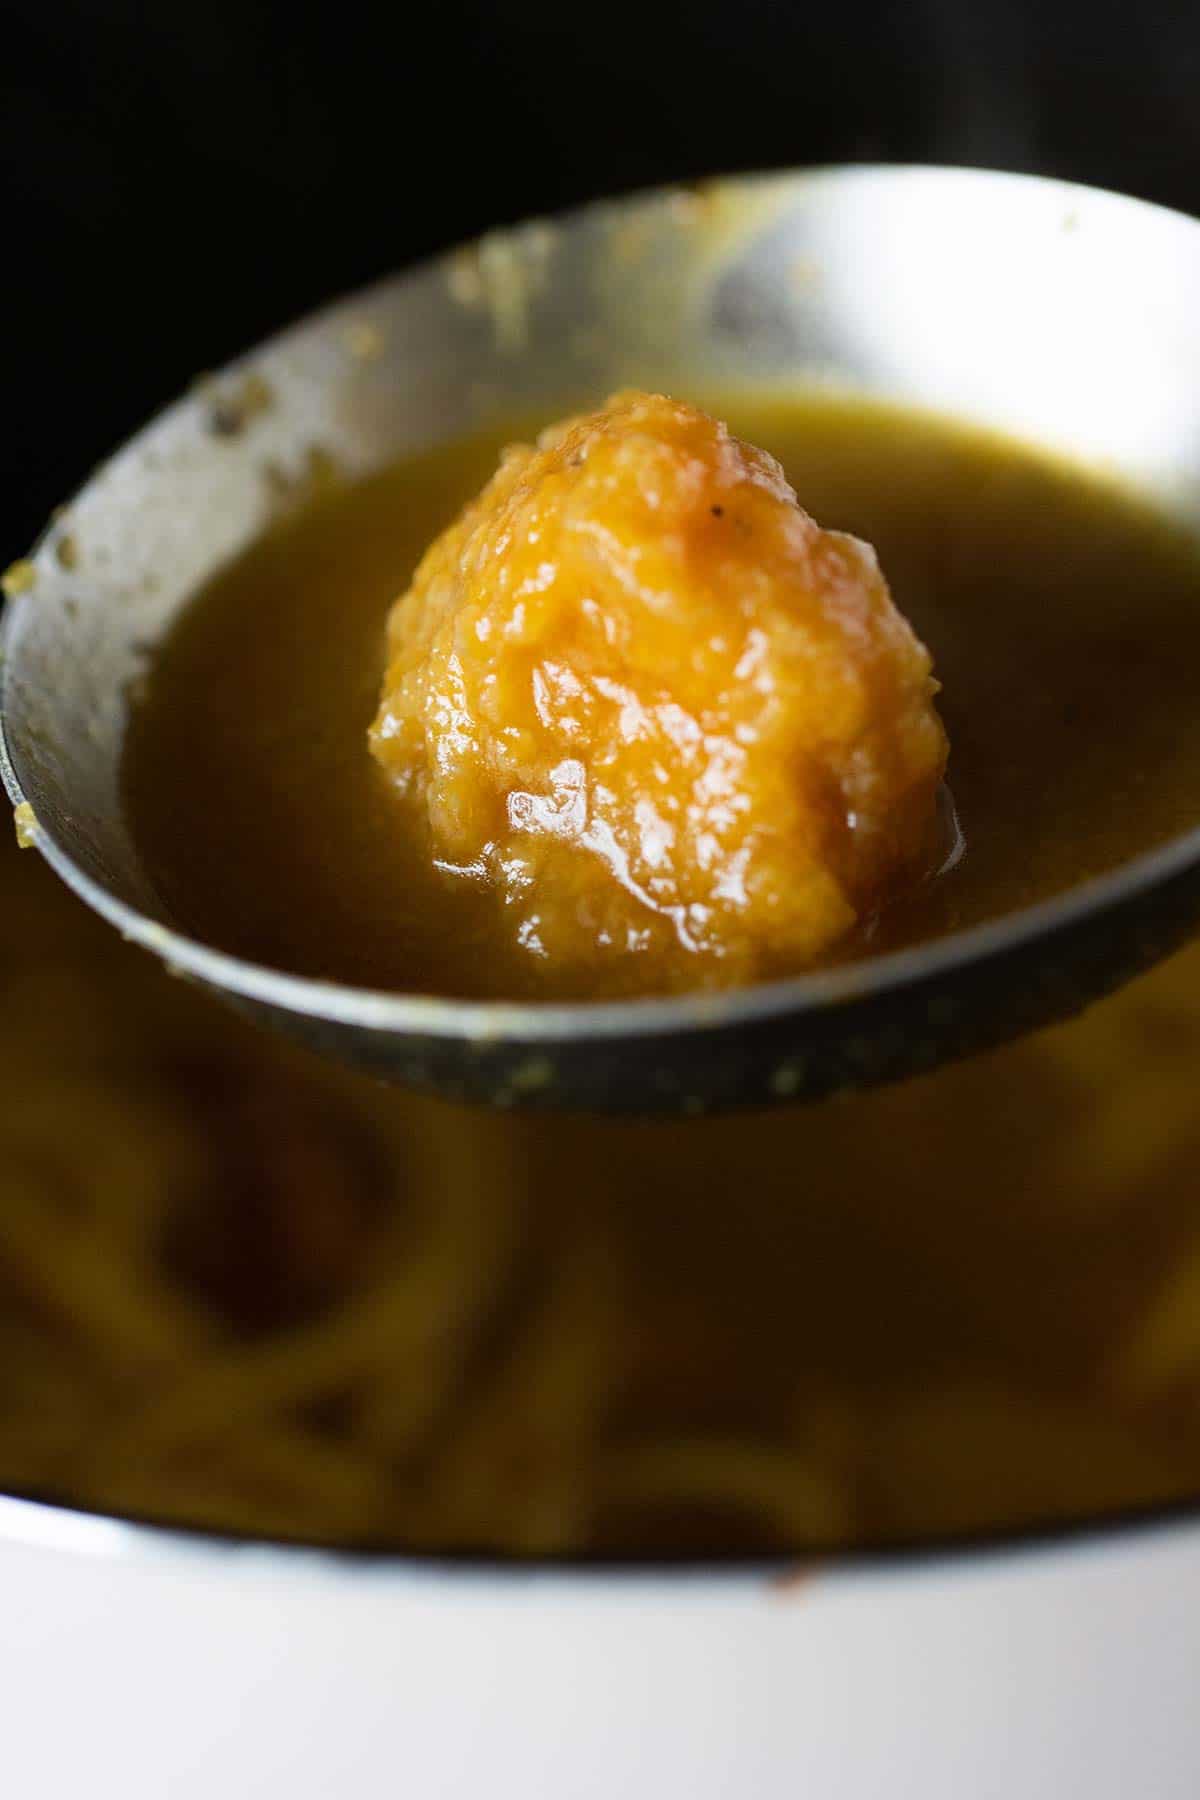 plantain ball close up on a laddle with soup.